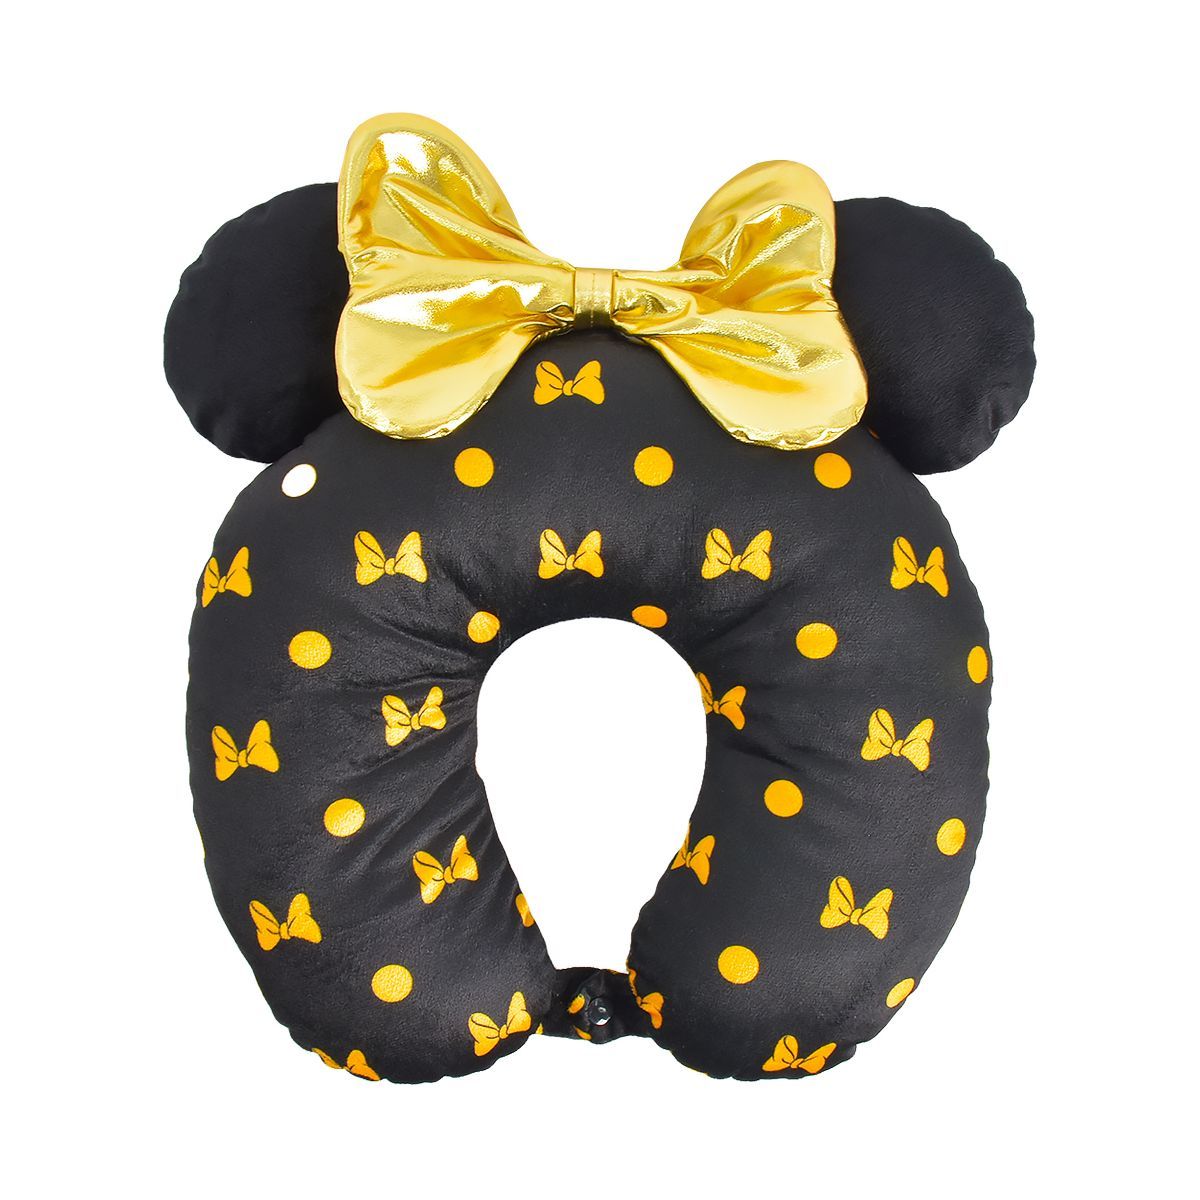 Disney Minnie Mouse Travel Neck Pillow with 3D Ears and Bow | Target